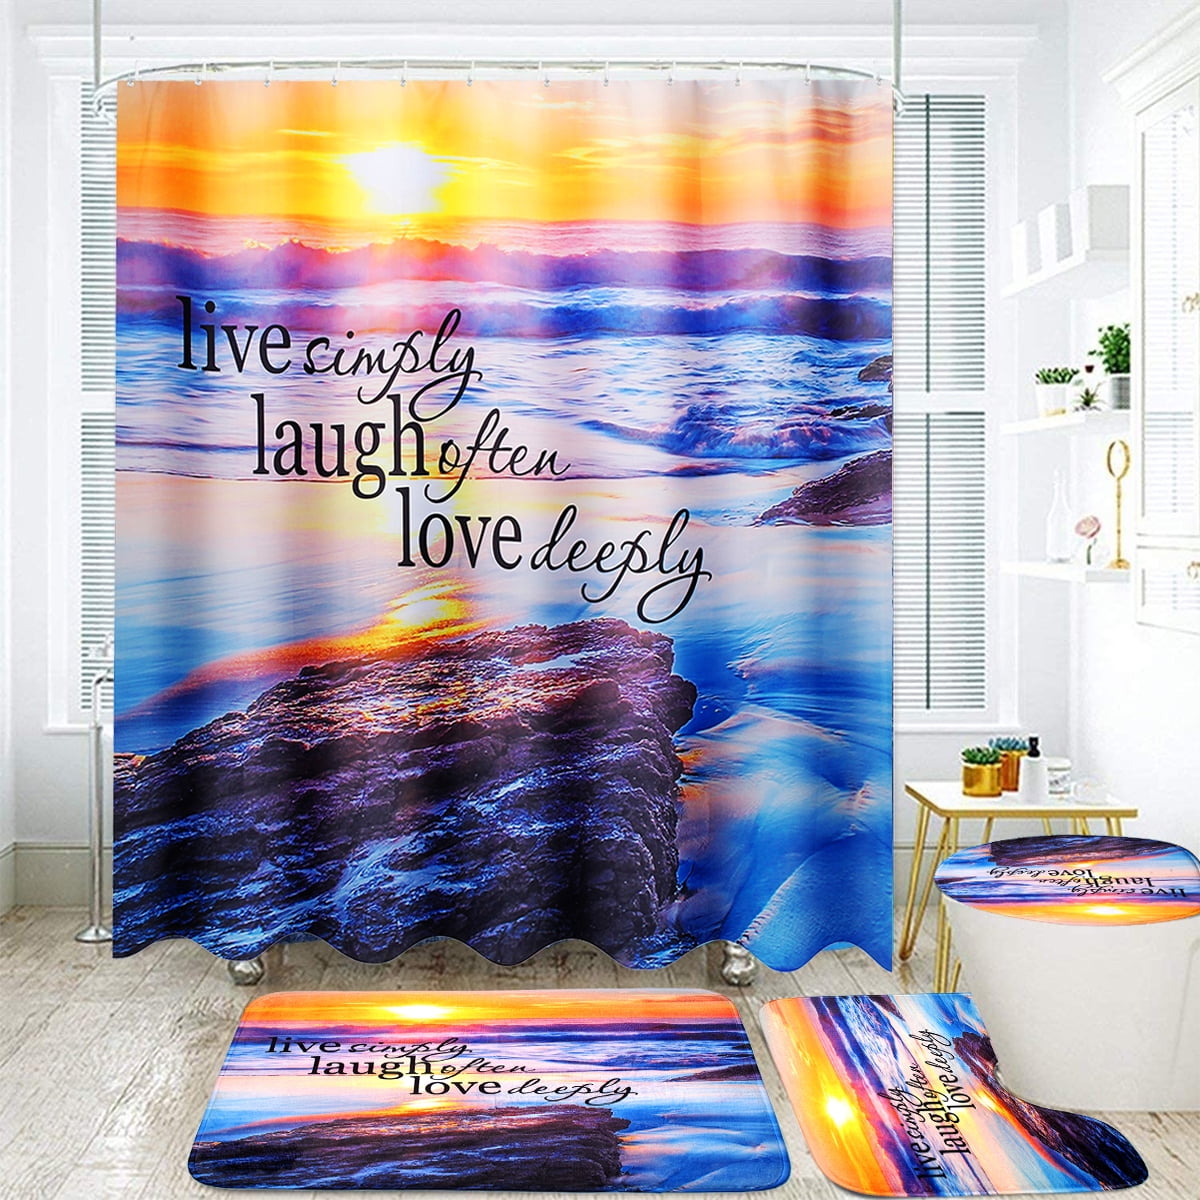 Details about   Love Heart Extra Long Art Shower Curtain Waterproof Polyester Fabric Mould Proof 